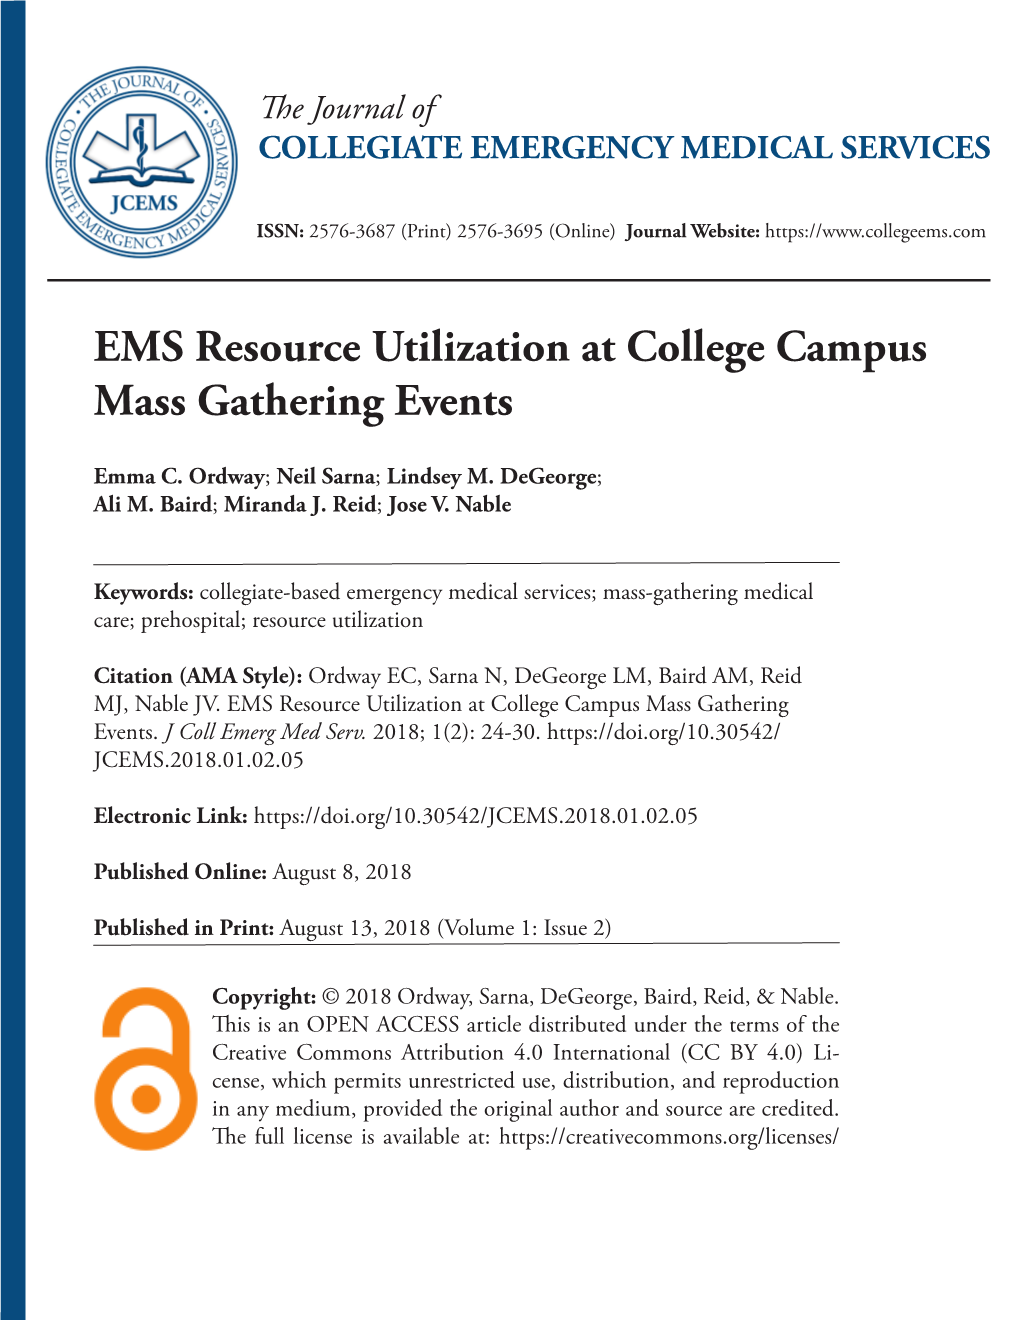 EMS Resource Utilization at College Campus Mass Gathering Events